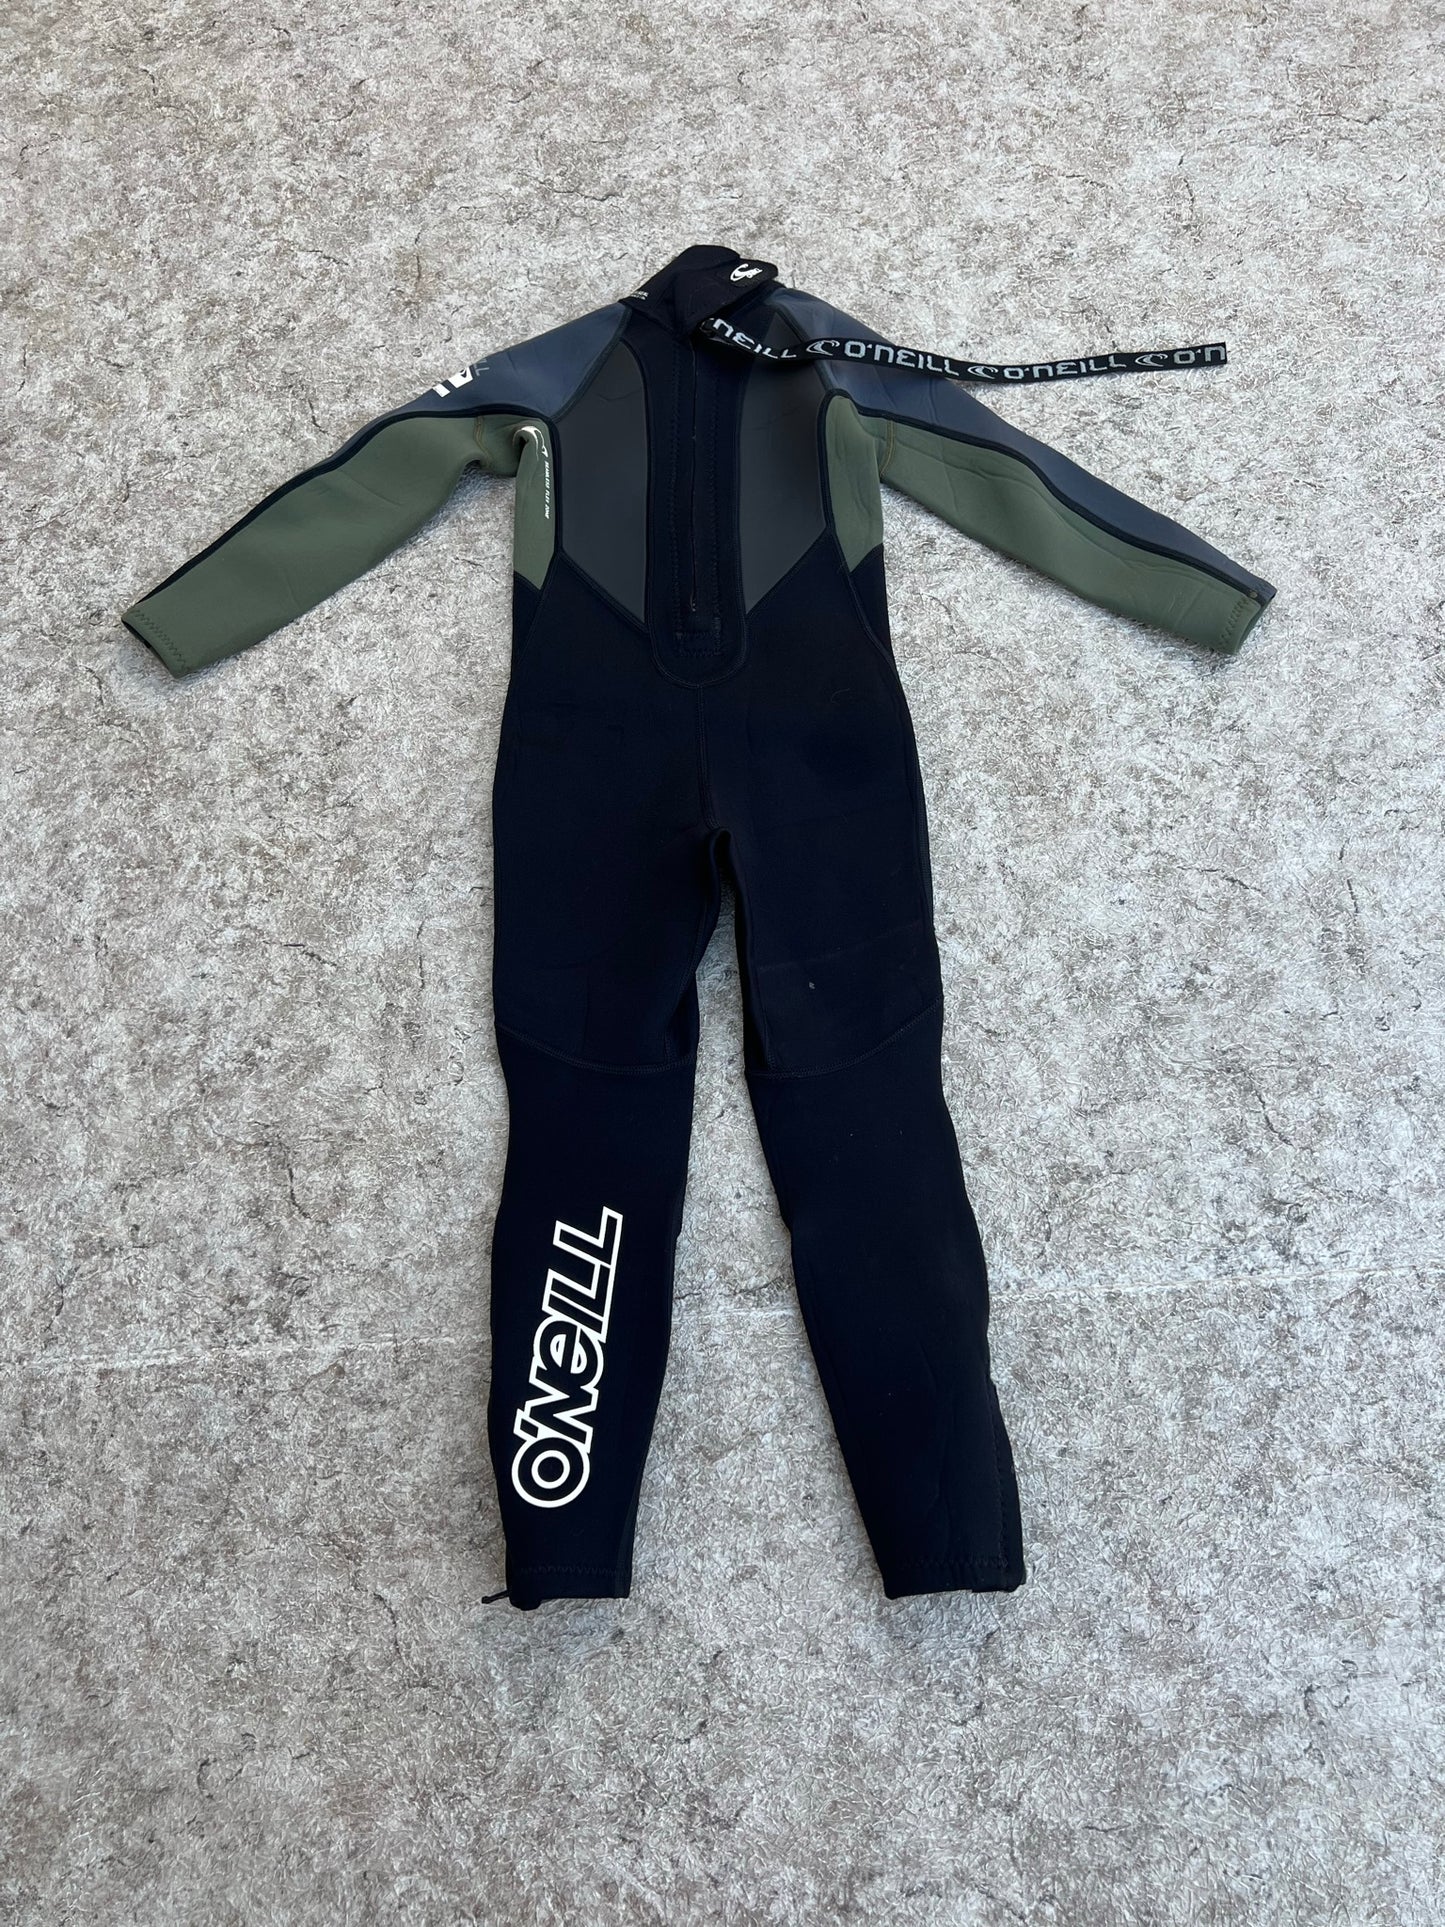 Wetsuit Child Size  4 Sage Green Black O'Neill Full 3-2 mm Neoprene Zippers Up Ankles Outstanding Quality Like New